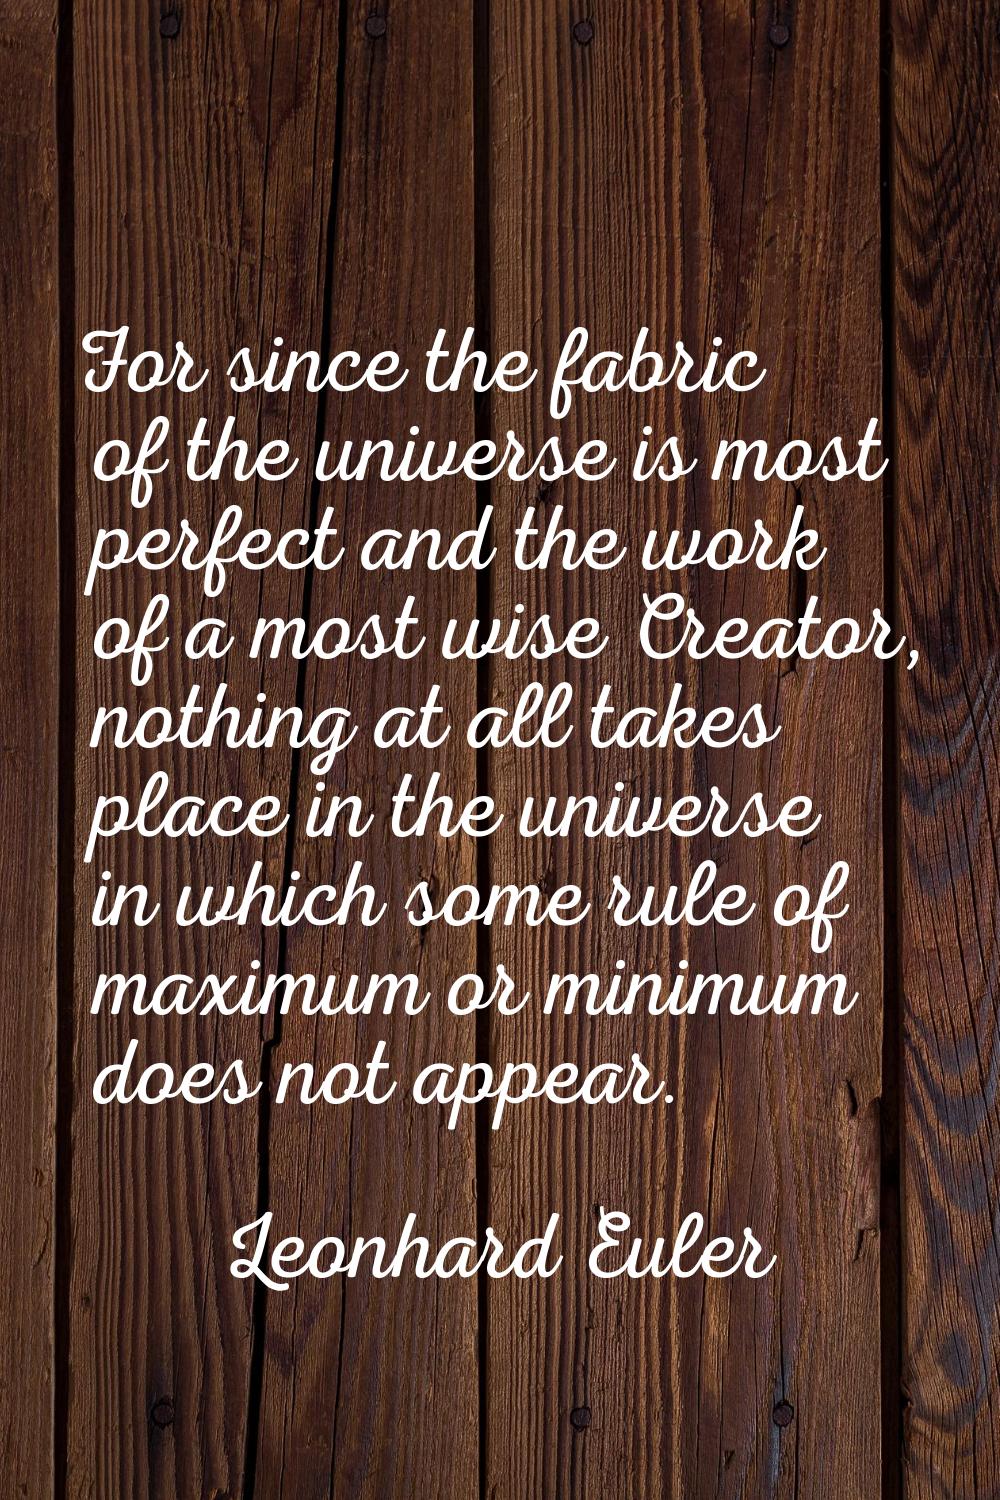 For since the fabric of the universe is most perfect and the work of a most wise Creator, nothing a